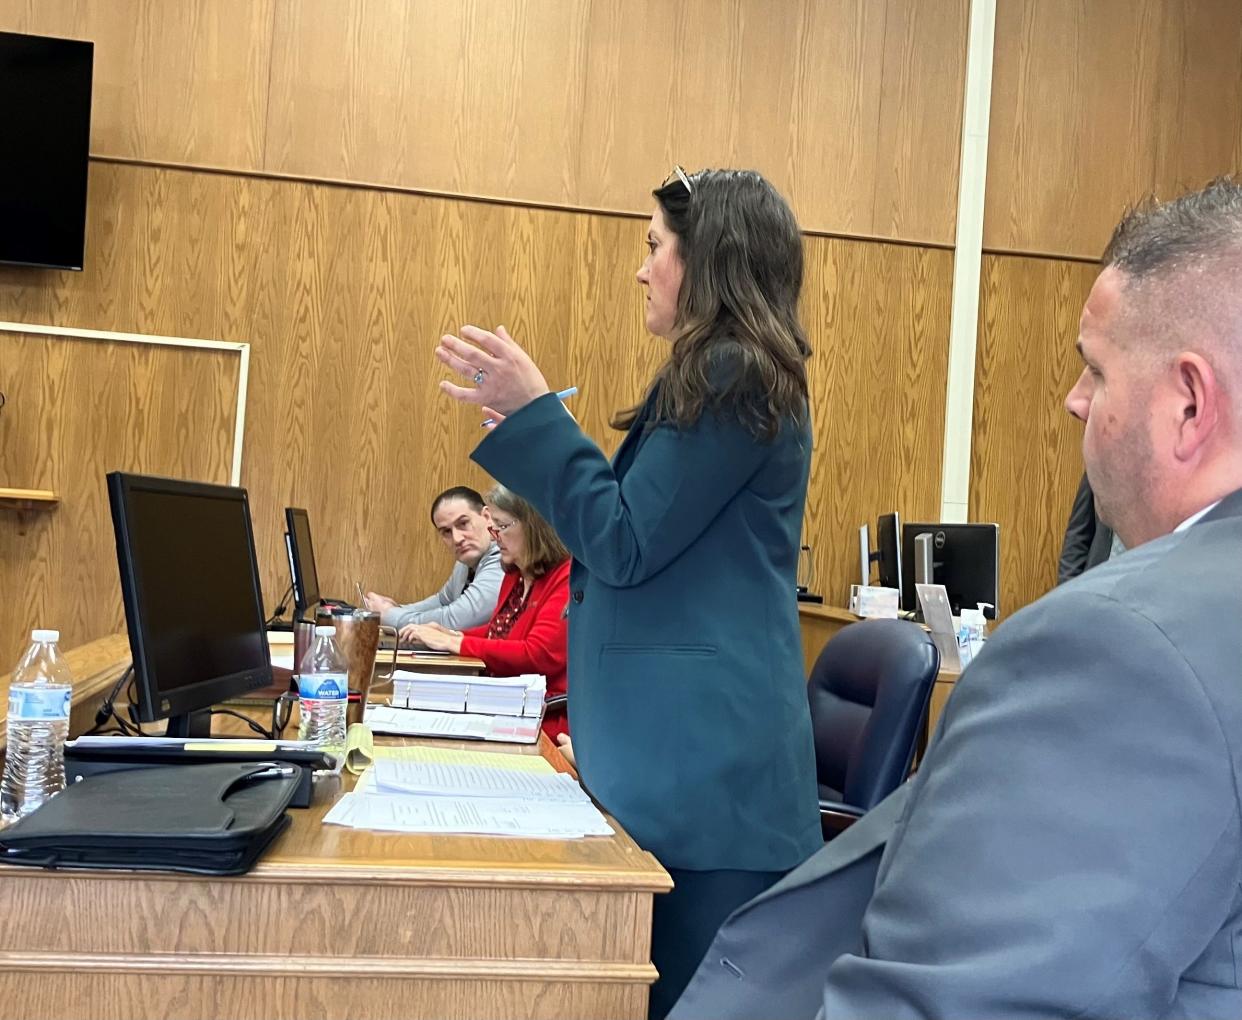 Assistant Licking County Prosecutor Darcy Cook stands to speak to county Common Pleas Judge David Branstool while defendant David Perrine (next to wall) and his attorney, Kristen Burkett, listen during the opening day of testimony in the murder trial of Perrine, charged in the killing of his mother, Debra Perrine.